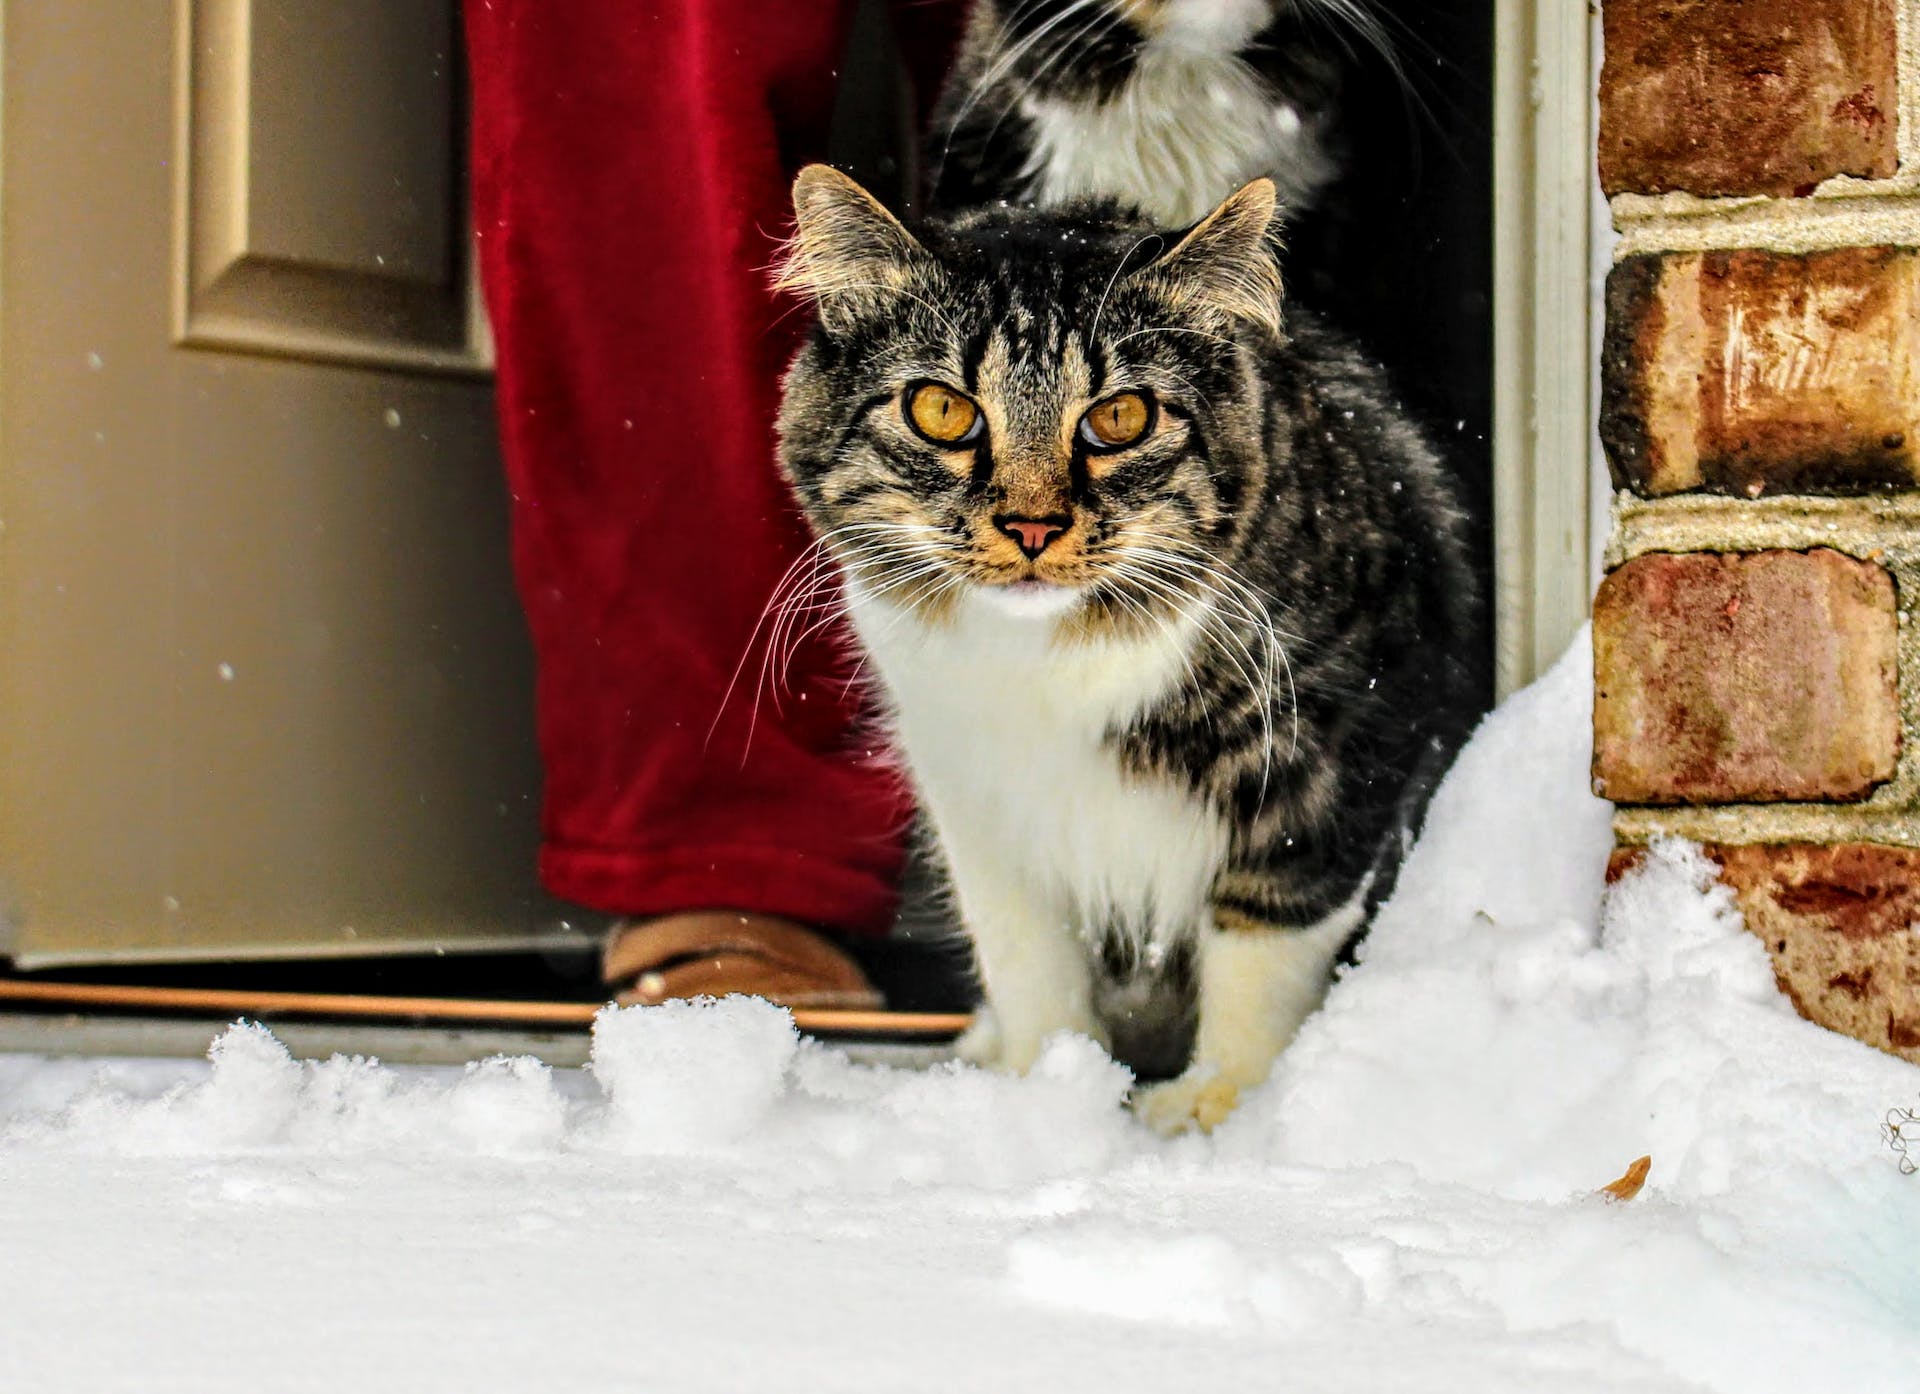 A cat stepping outdoors for a walk in the snow